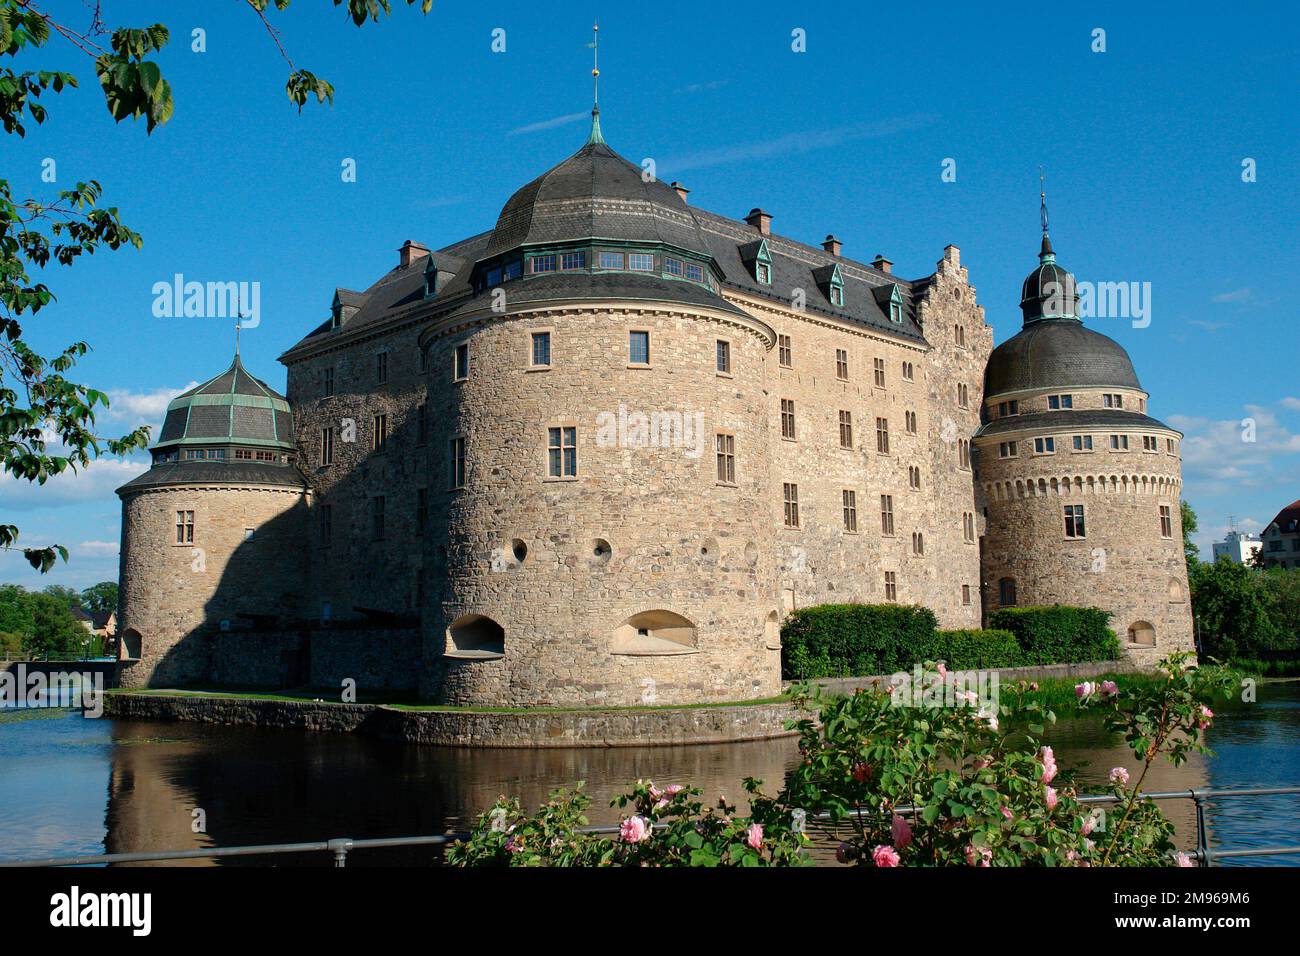 View of the medieval Orebro Castle in the city of Orebro, Narke, Sweden.  Dating from the 13th century, it was expanded during the reign of the royal family Vasa. Stock Photo